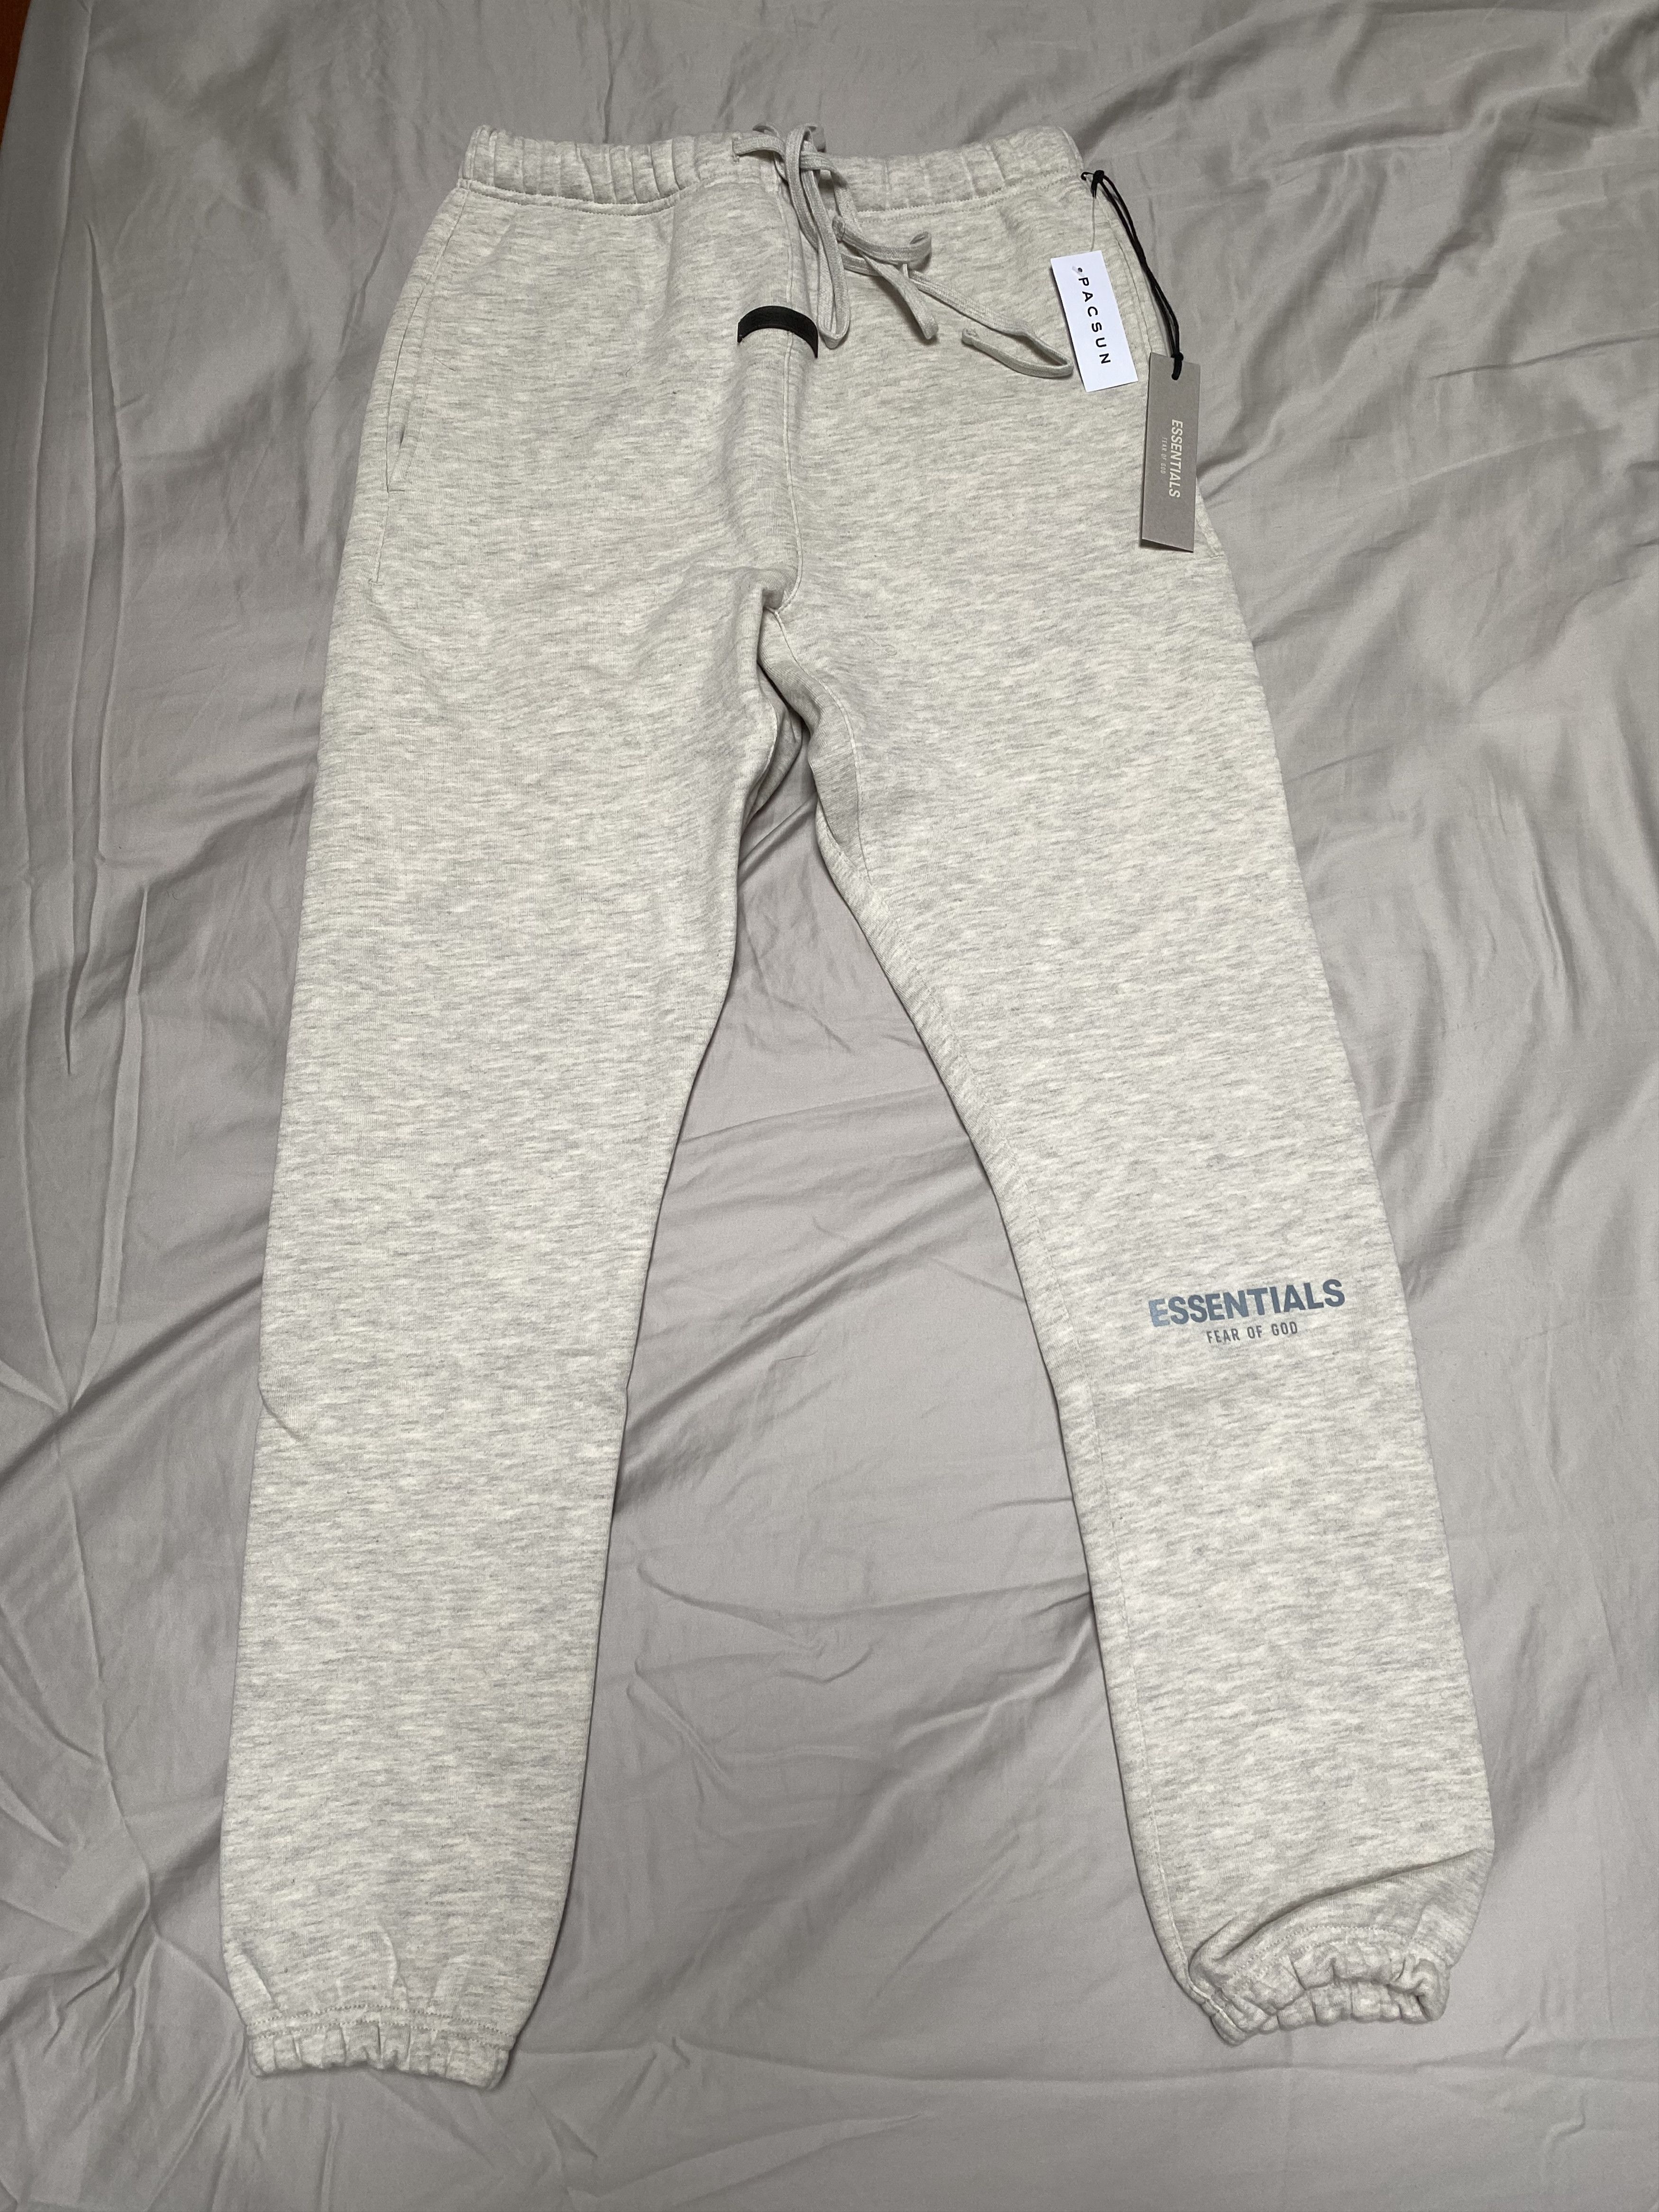 Fear of God FEAR OF GOD ESSENTIAL SWEATPANTS LIGHT HEATHER OATMEAL Size US 32 / EU 48 - 1 Preview